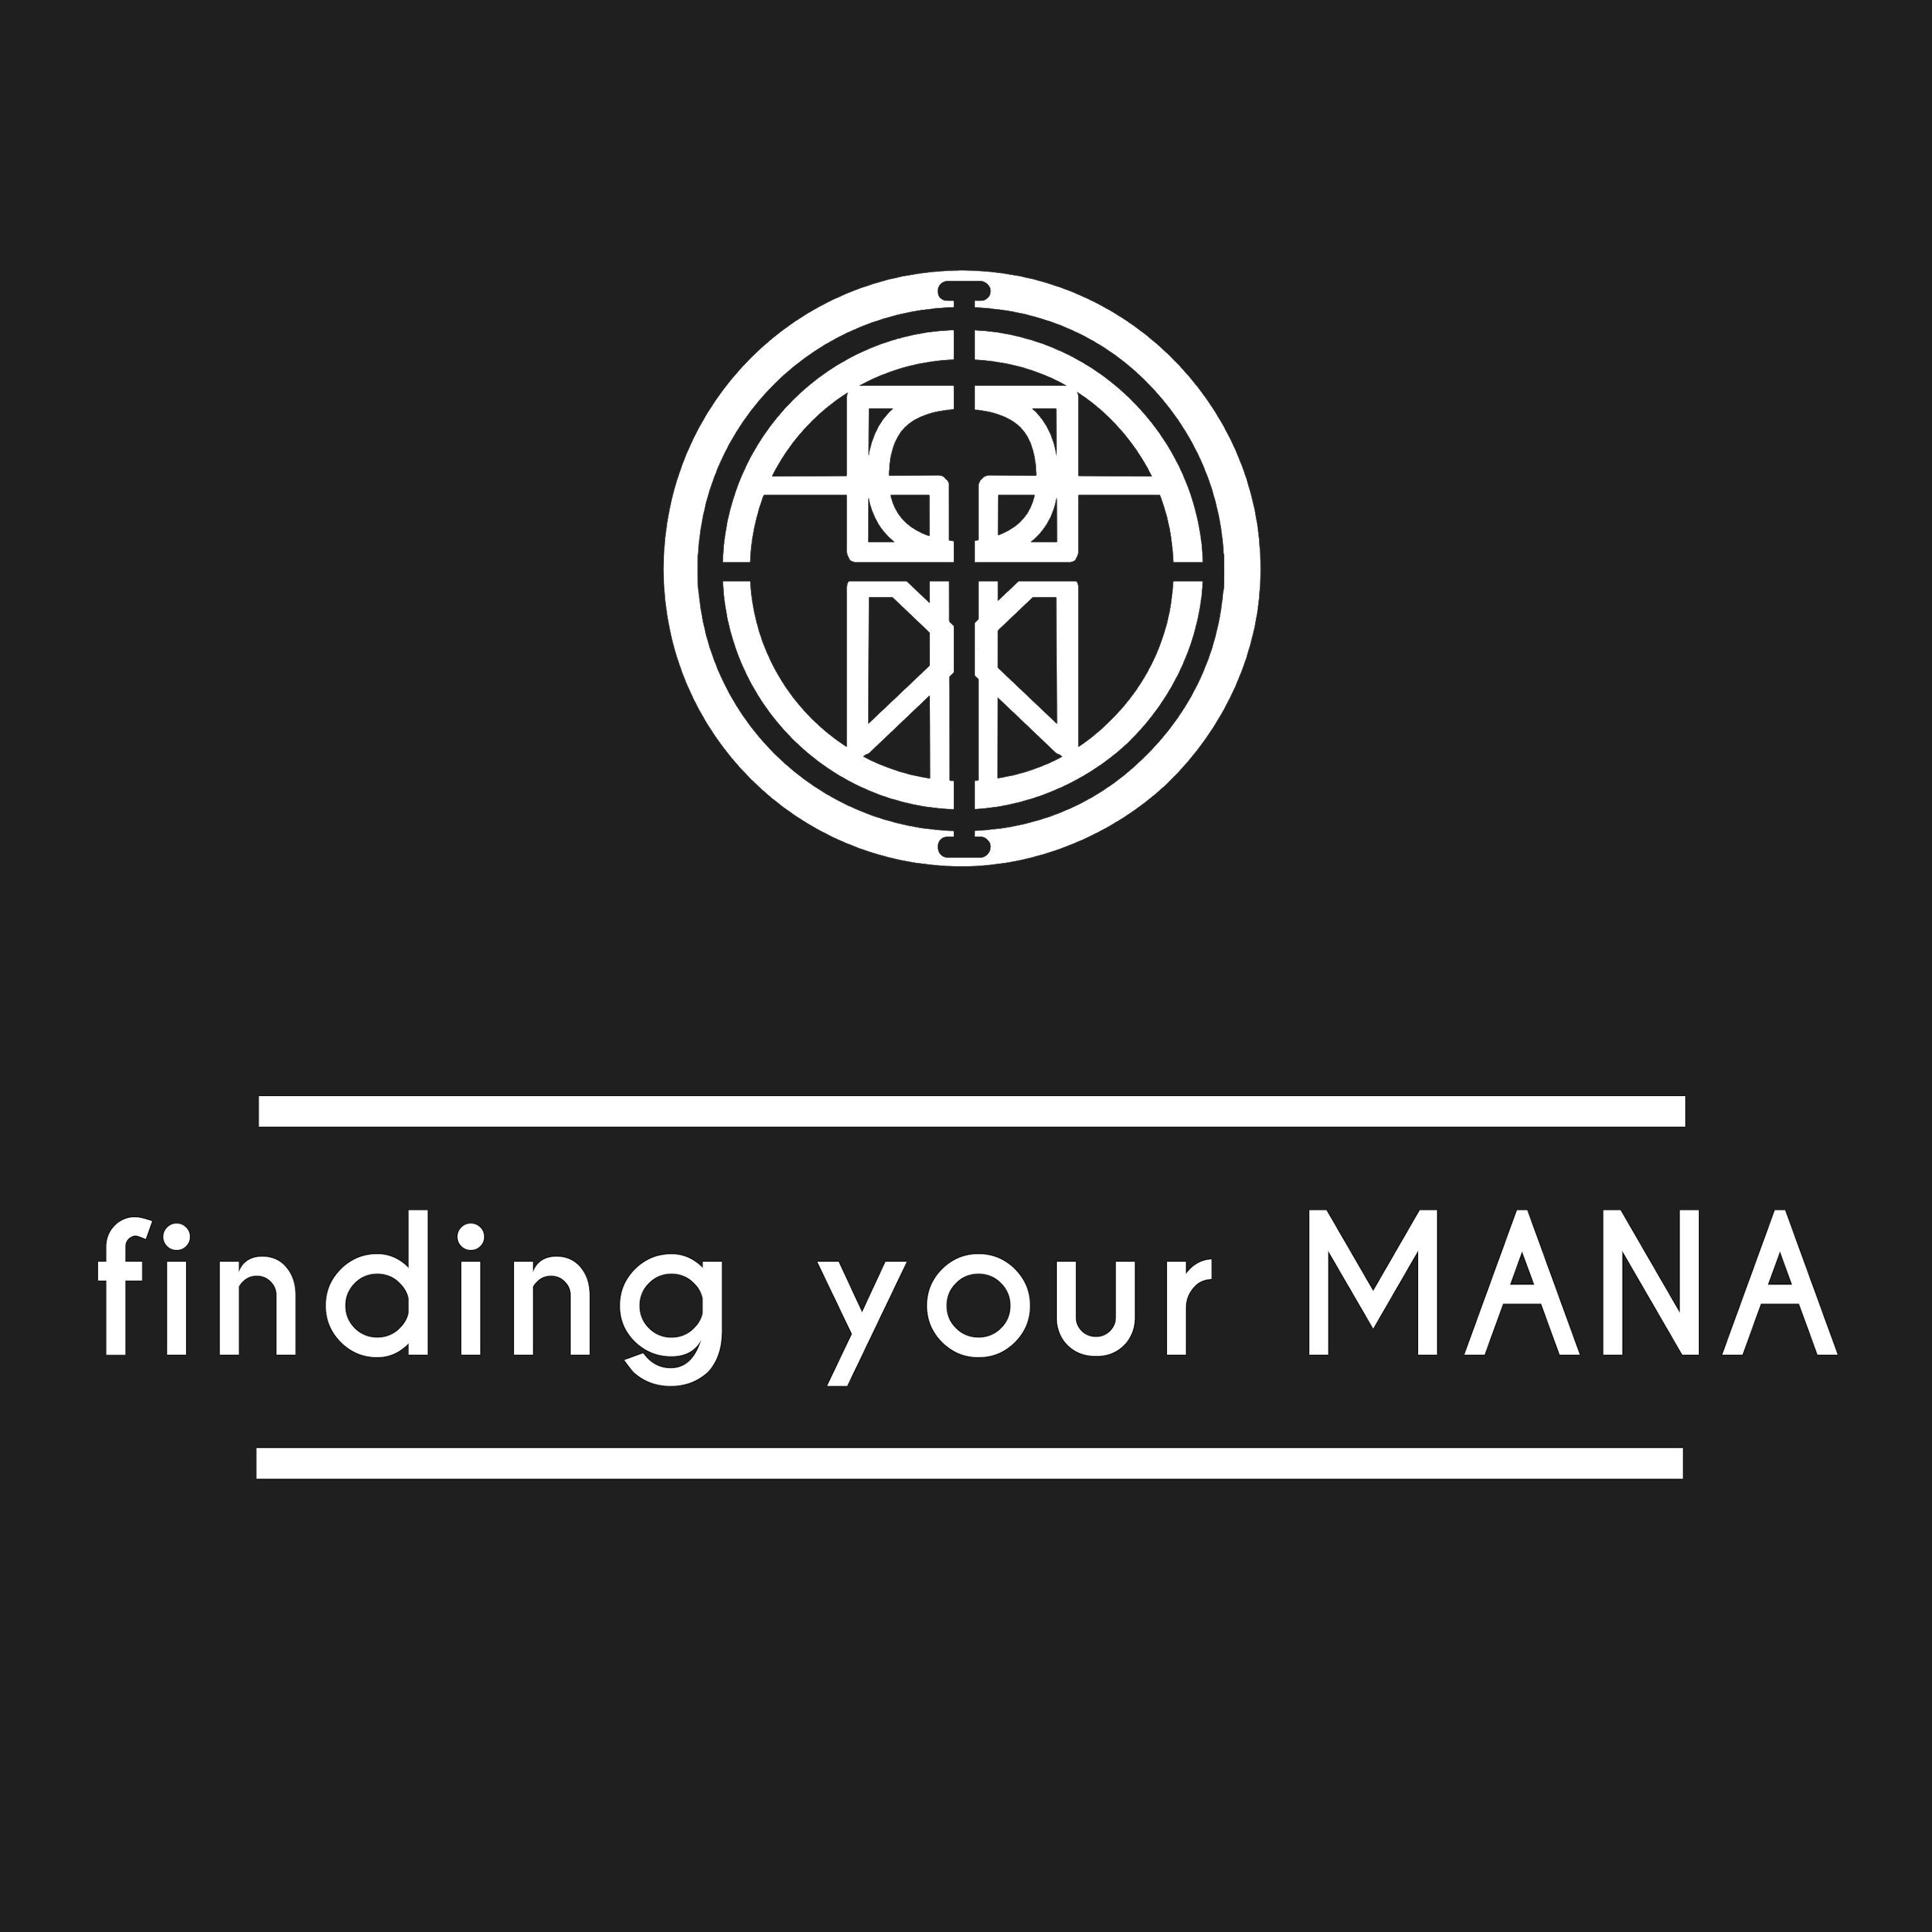 Finding Your MANA